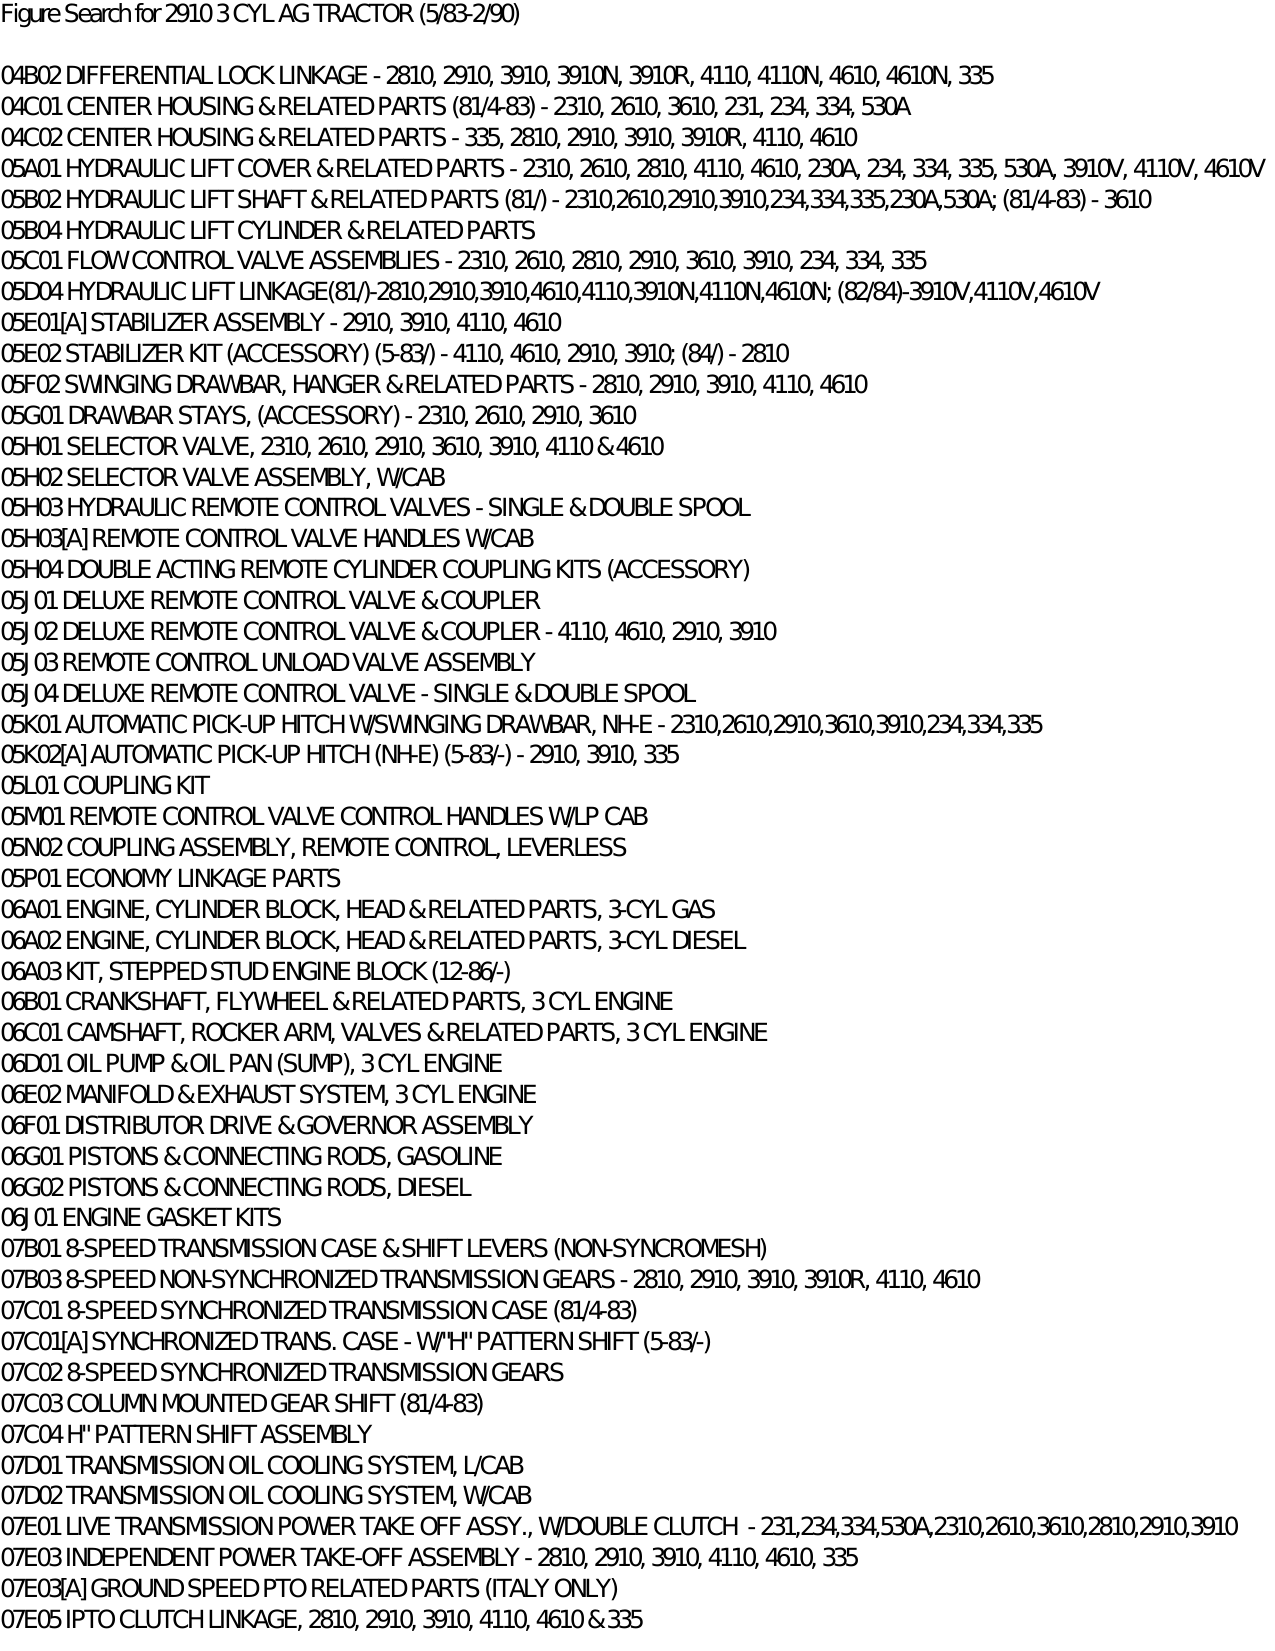 1983-1989 Ford 2910 tractor parts list Preview image 4